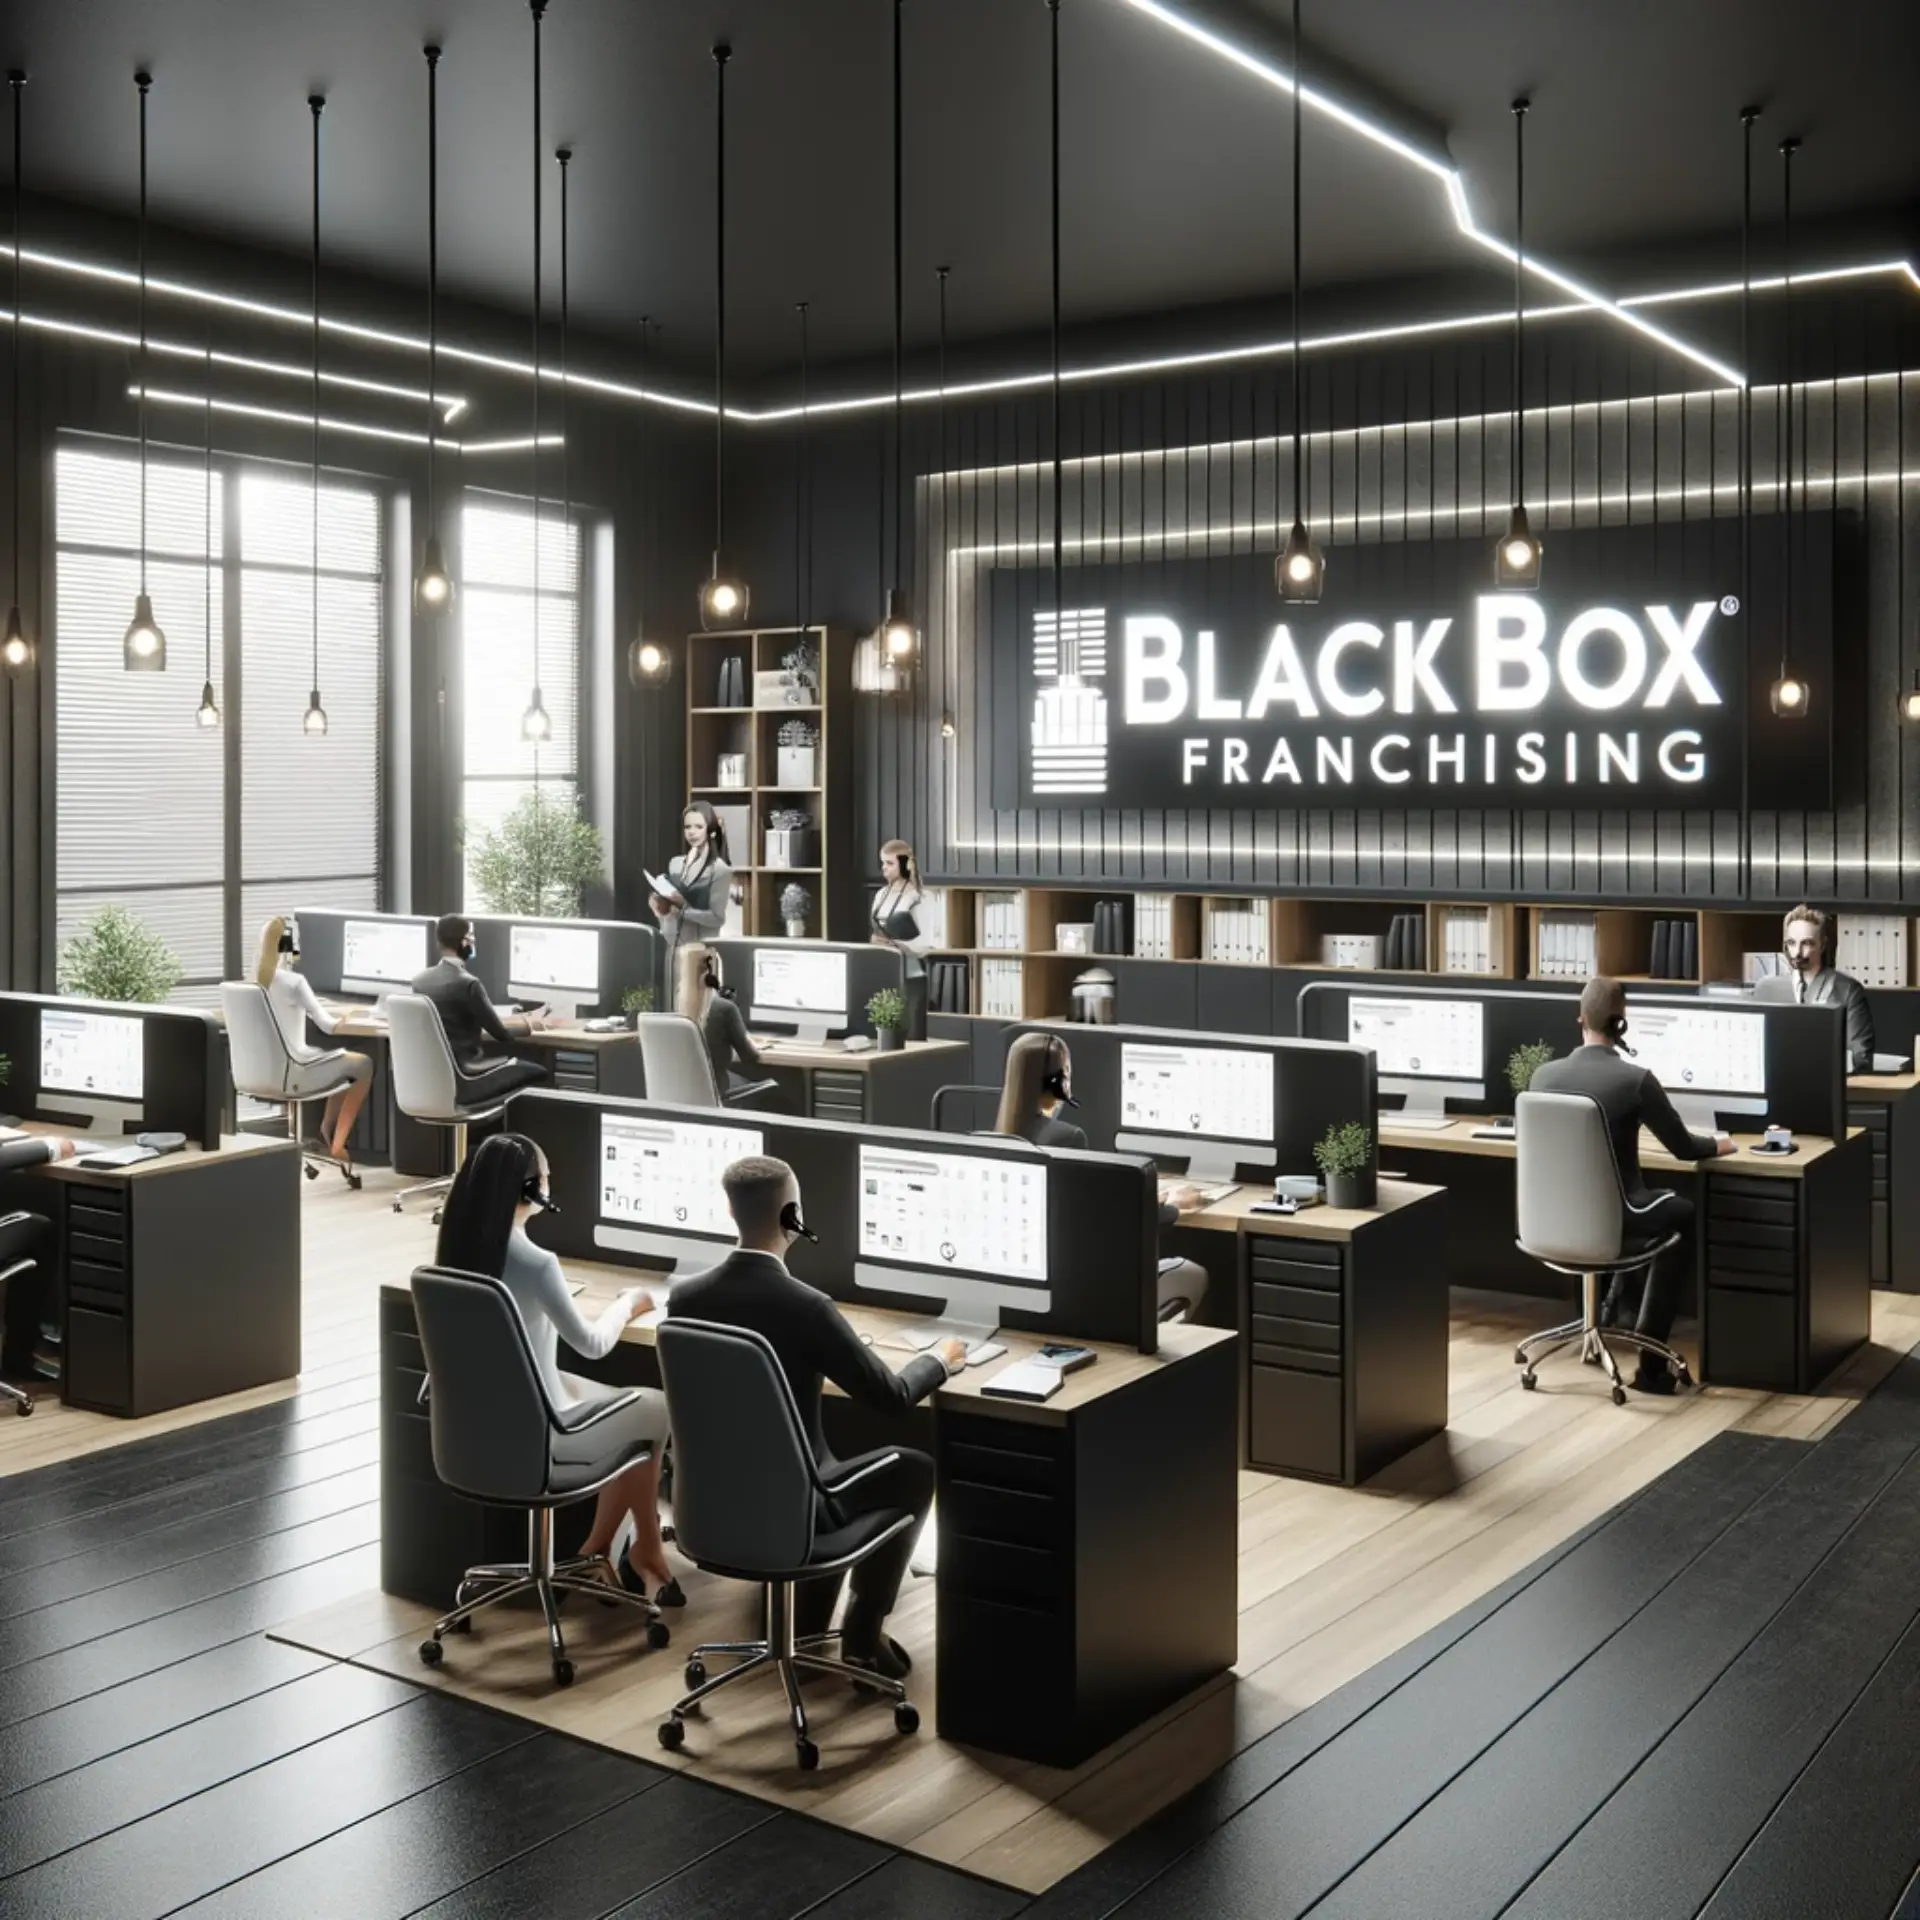 Black Box Franchising image of people sitting in an open office space